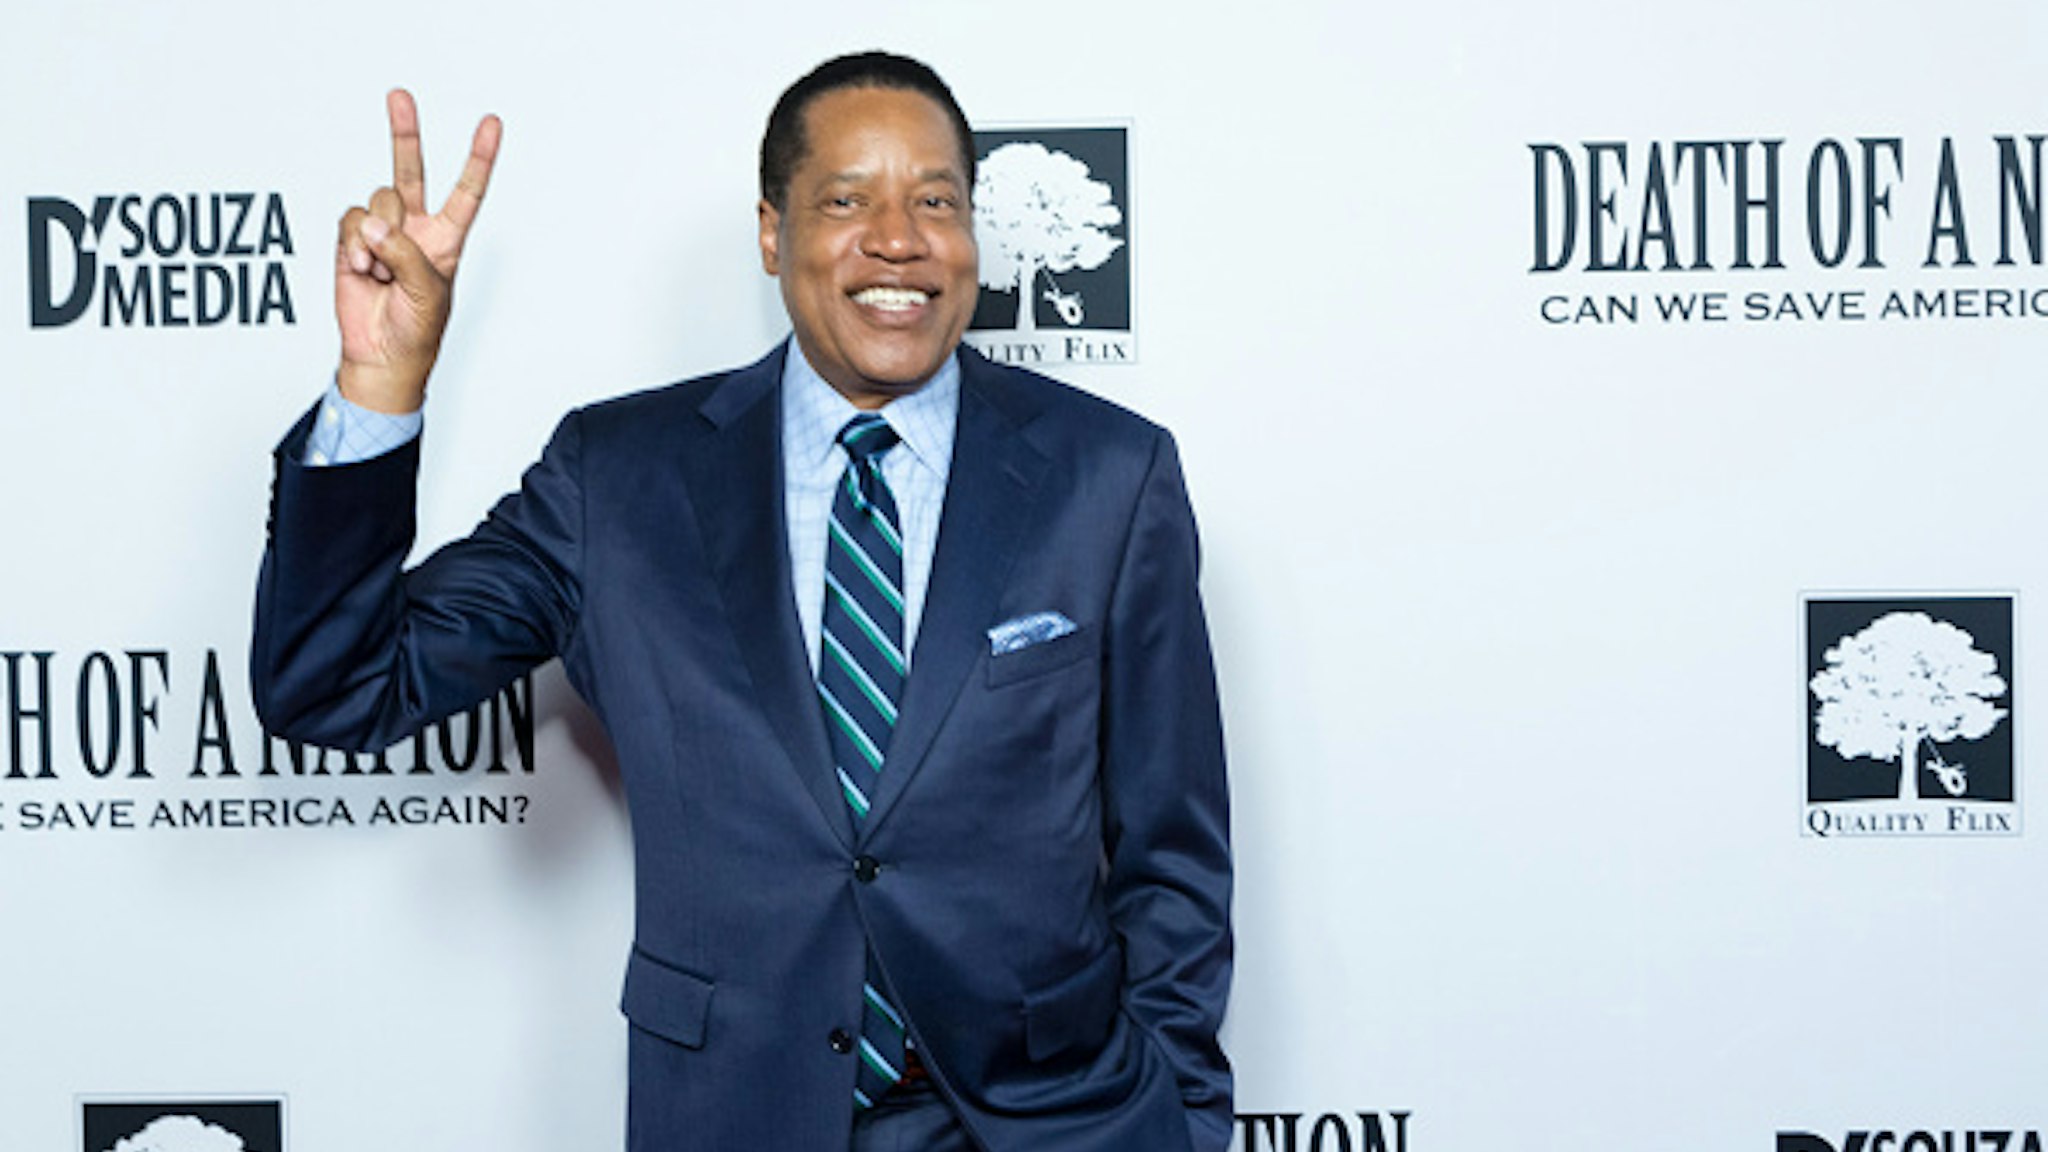 LOS ANGELES, CALIFORNIA - JULY 31: Radio Talk Show Host Larry Elder attends the "Death Of A Nation" Premiere at Regal Cinemas L.A. Live on July 31, 2018 in Los Angeles, California.